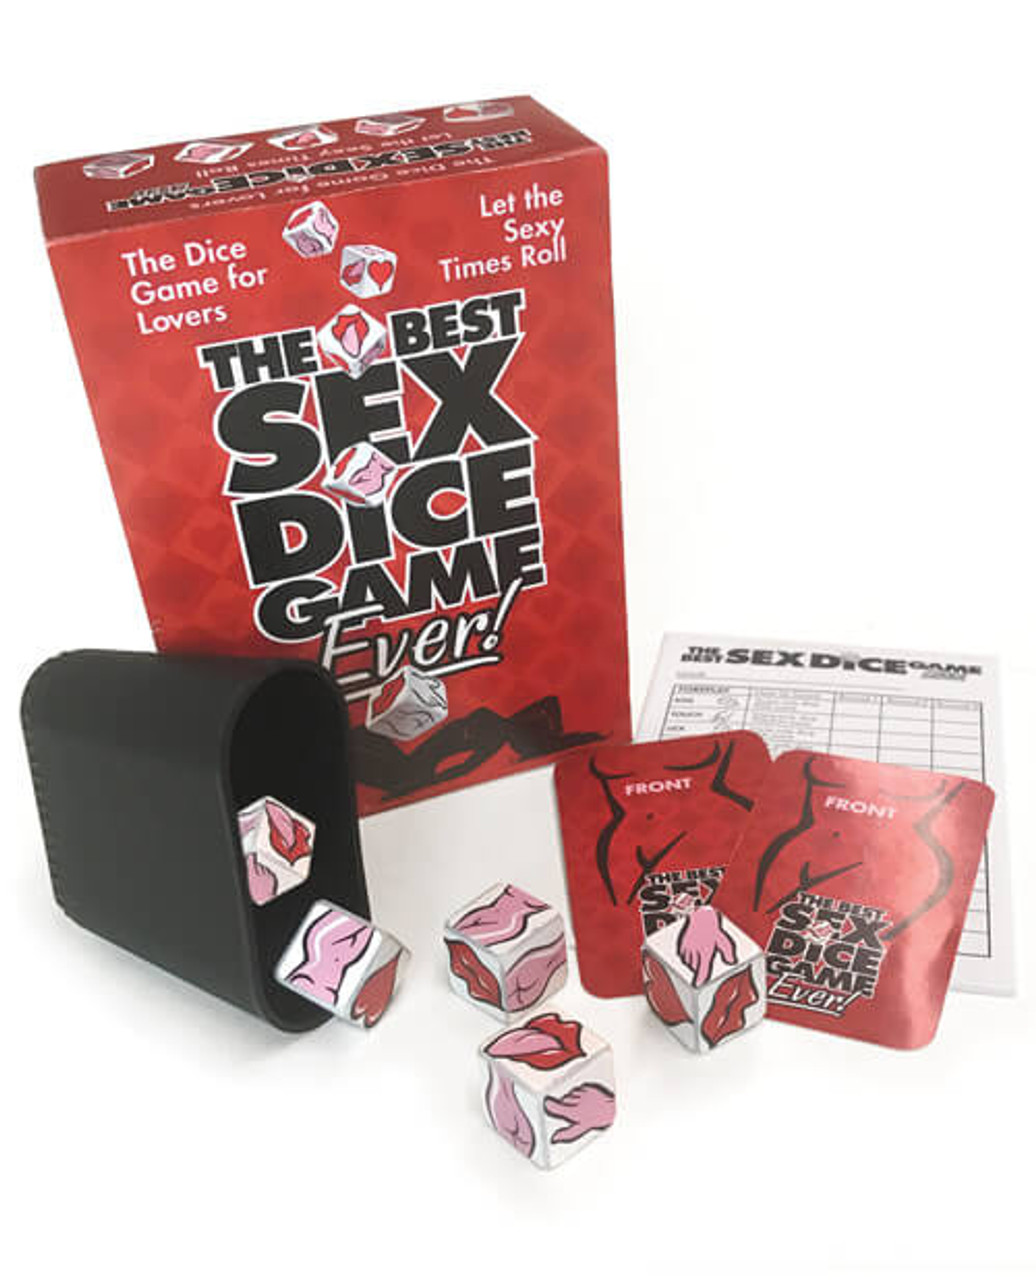 The Best Sex Dice Game Ever pic